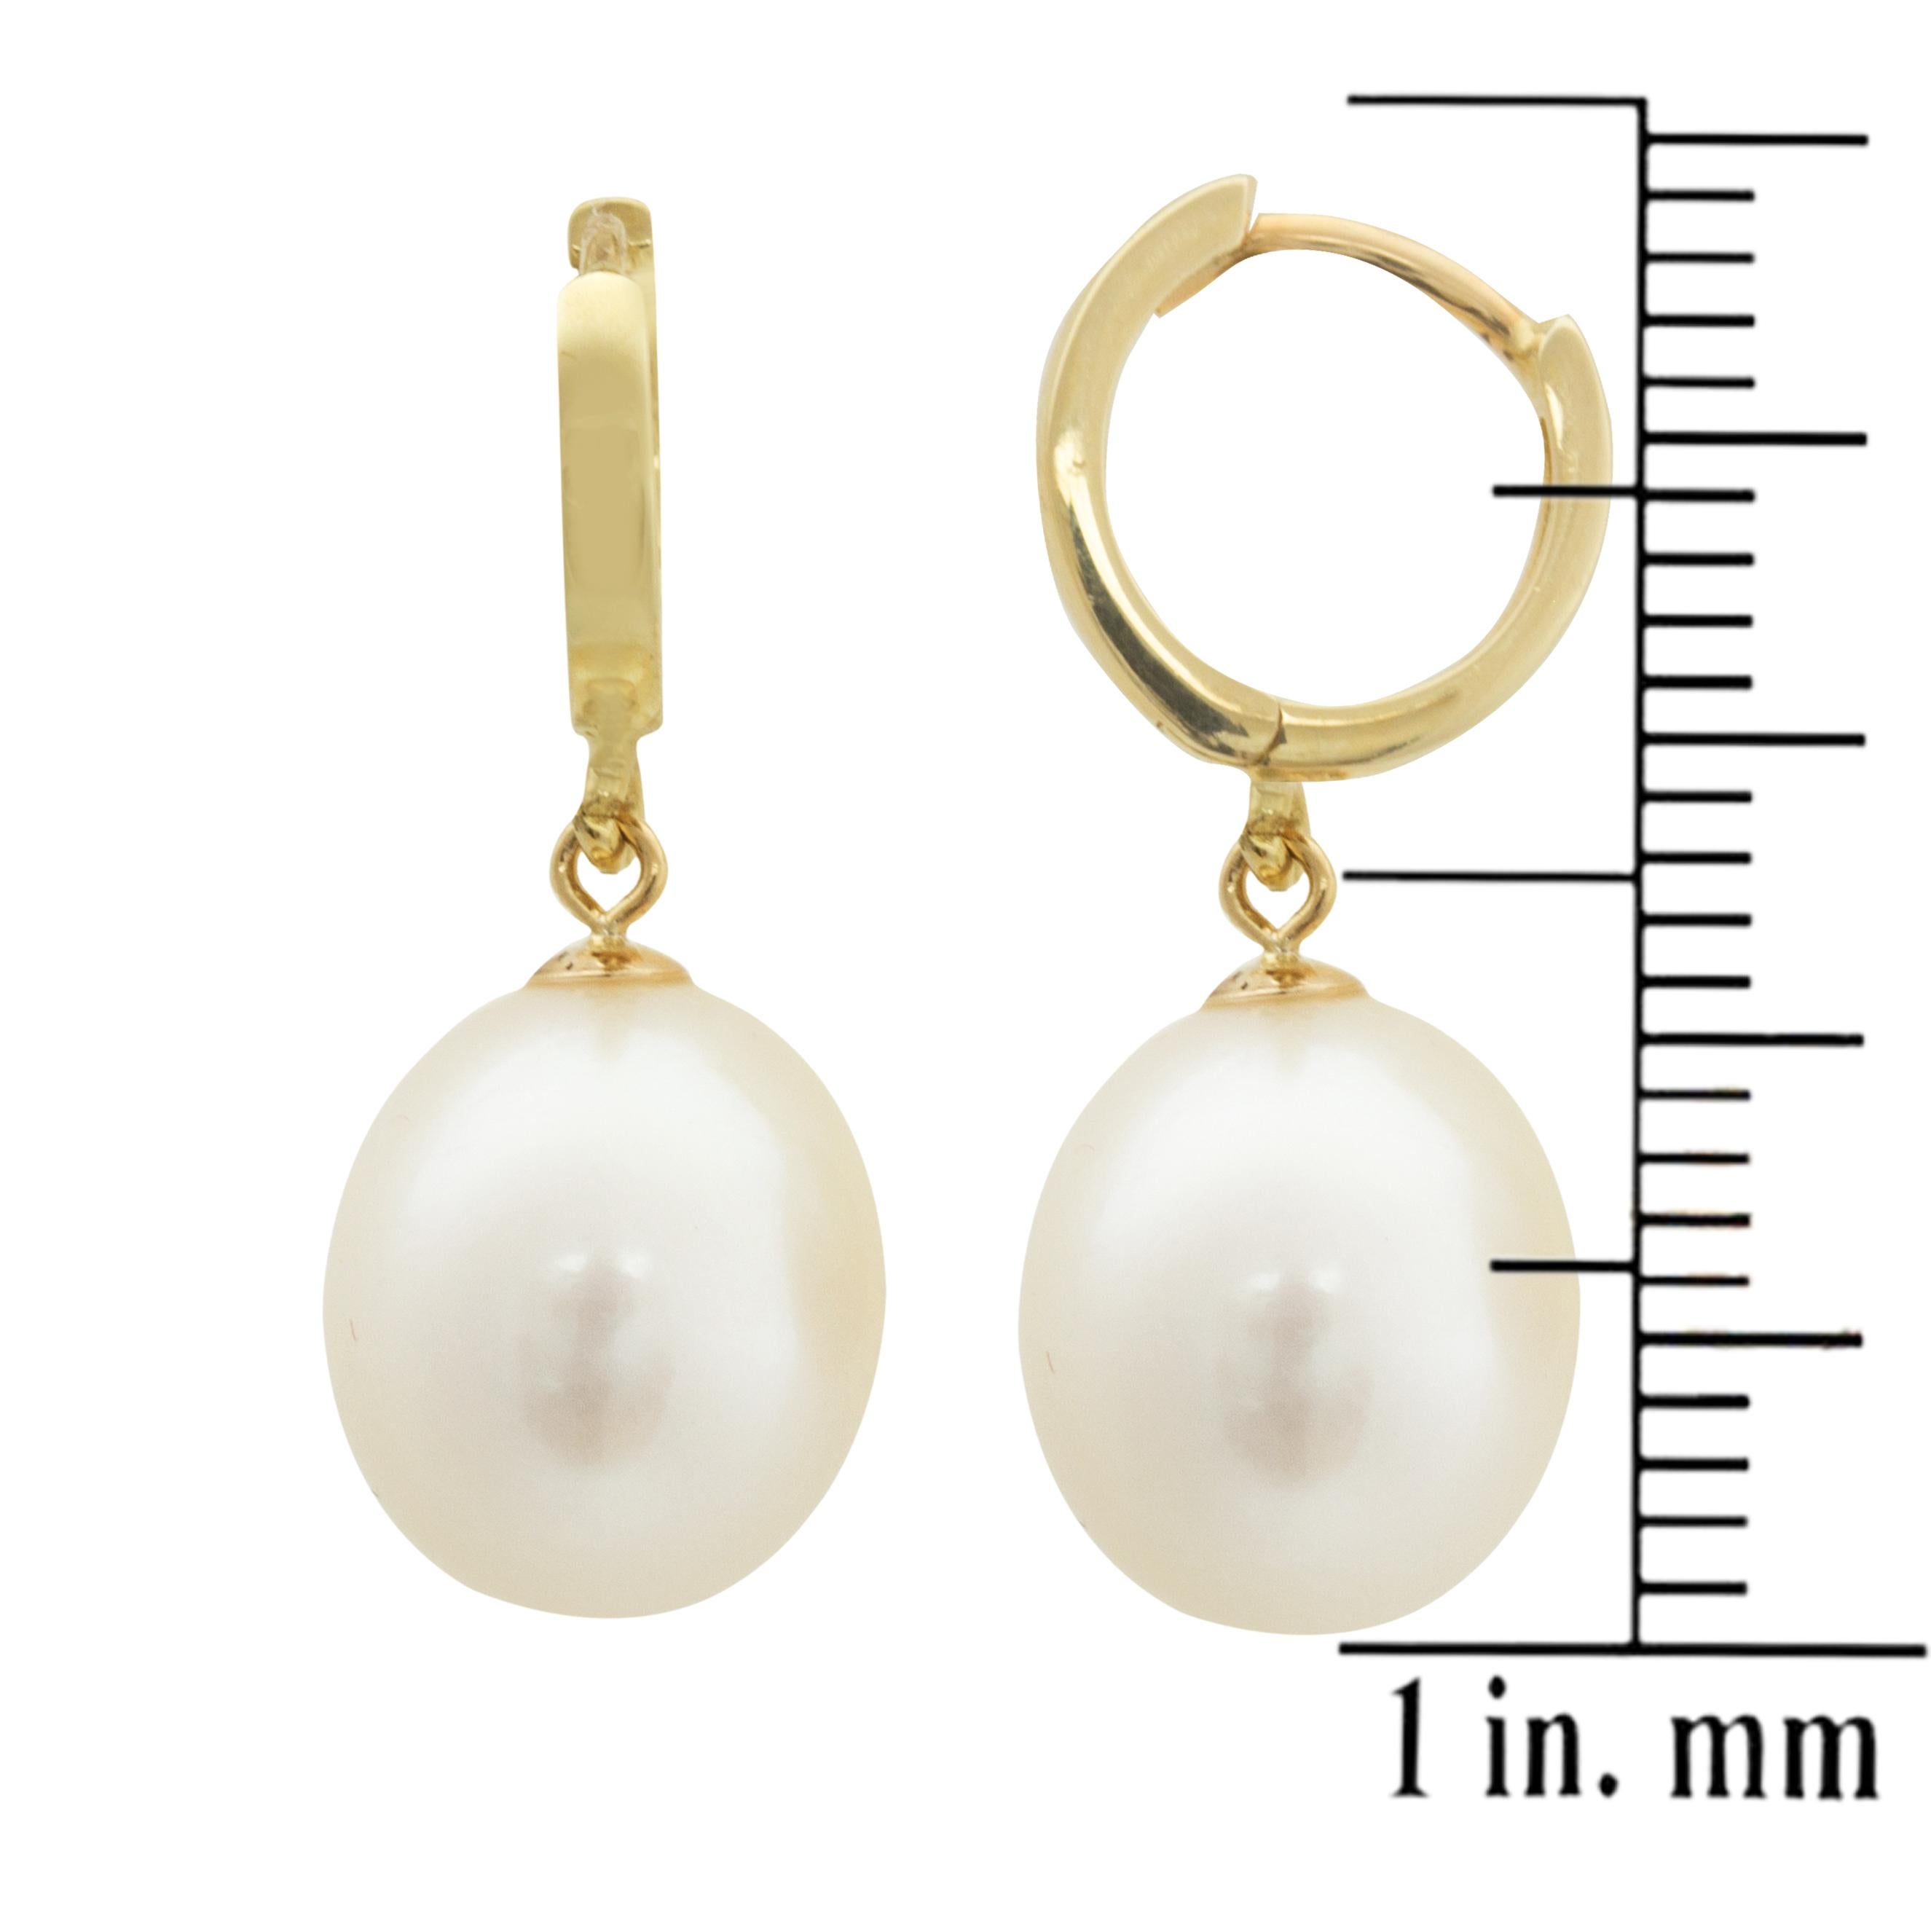 This set of dangling pearl earrings make for a delightful gift. Two regal pearls and 14-karat gold come together to create a classic look. Make a statement of class with these earrings. 

Features:
Dangling earrings for a classy complement to your